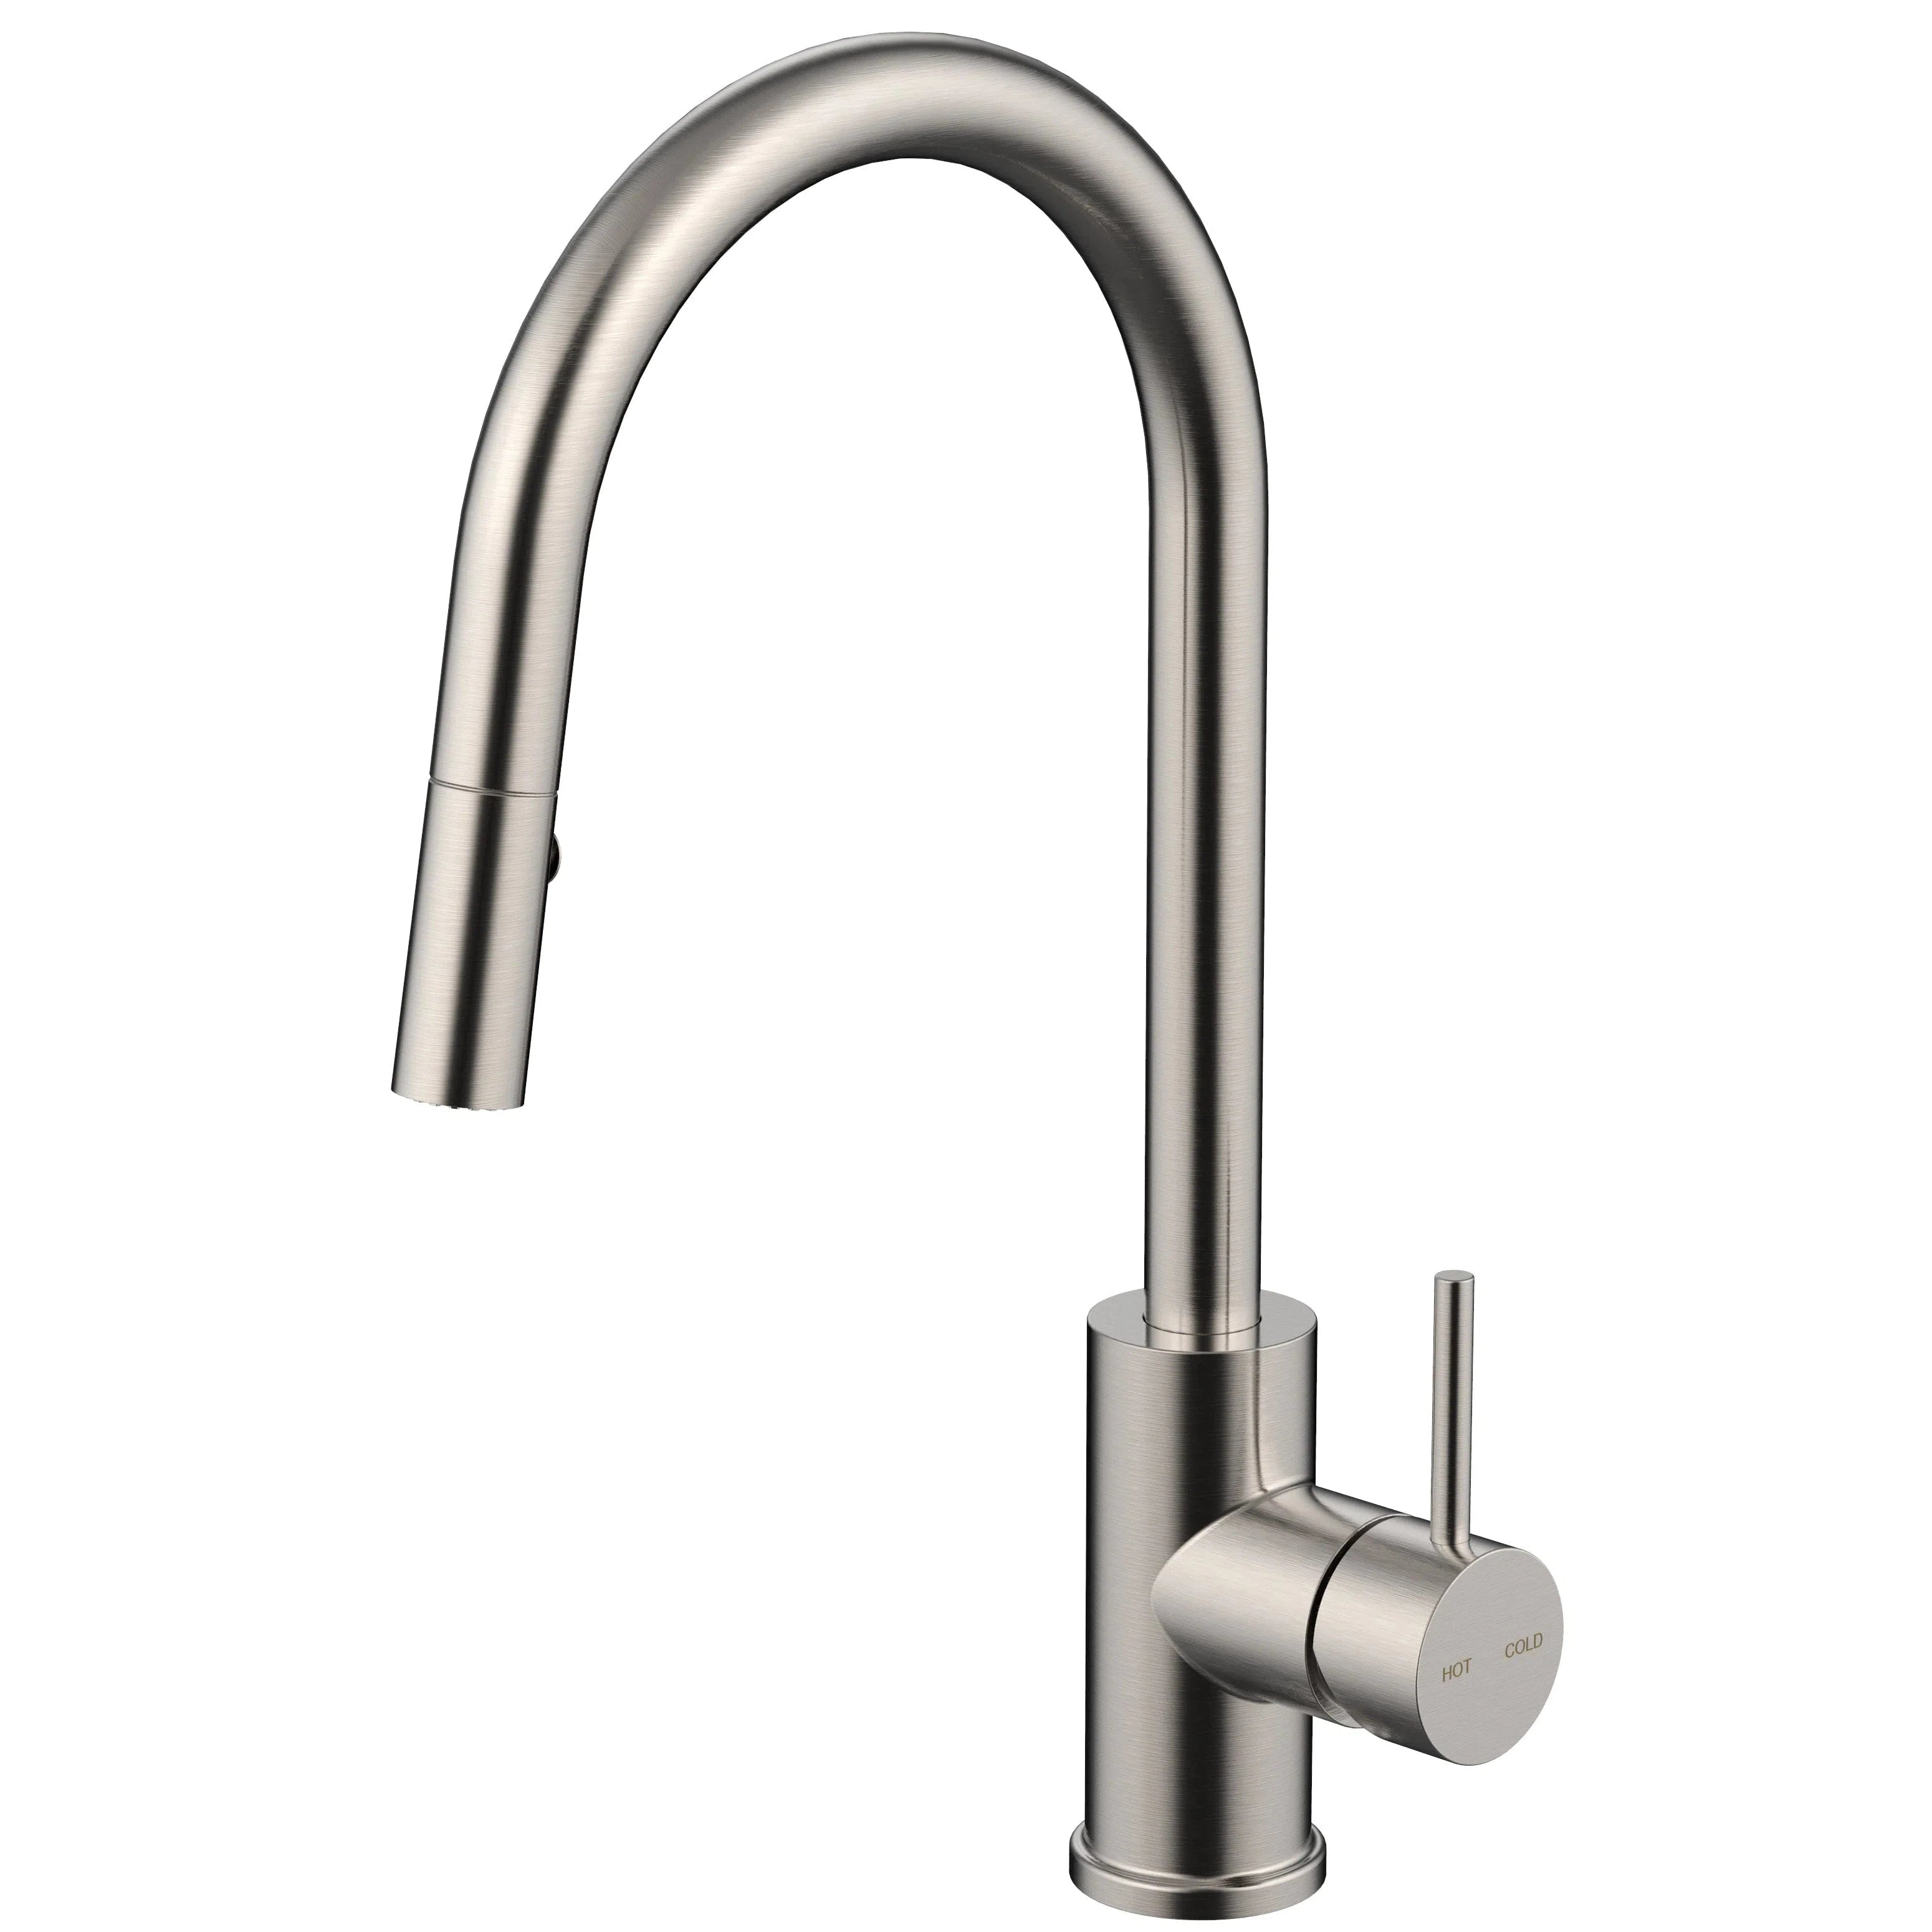 Millennium Cioso Pull Out Spray Sink Mixer - Brushed Nickel